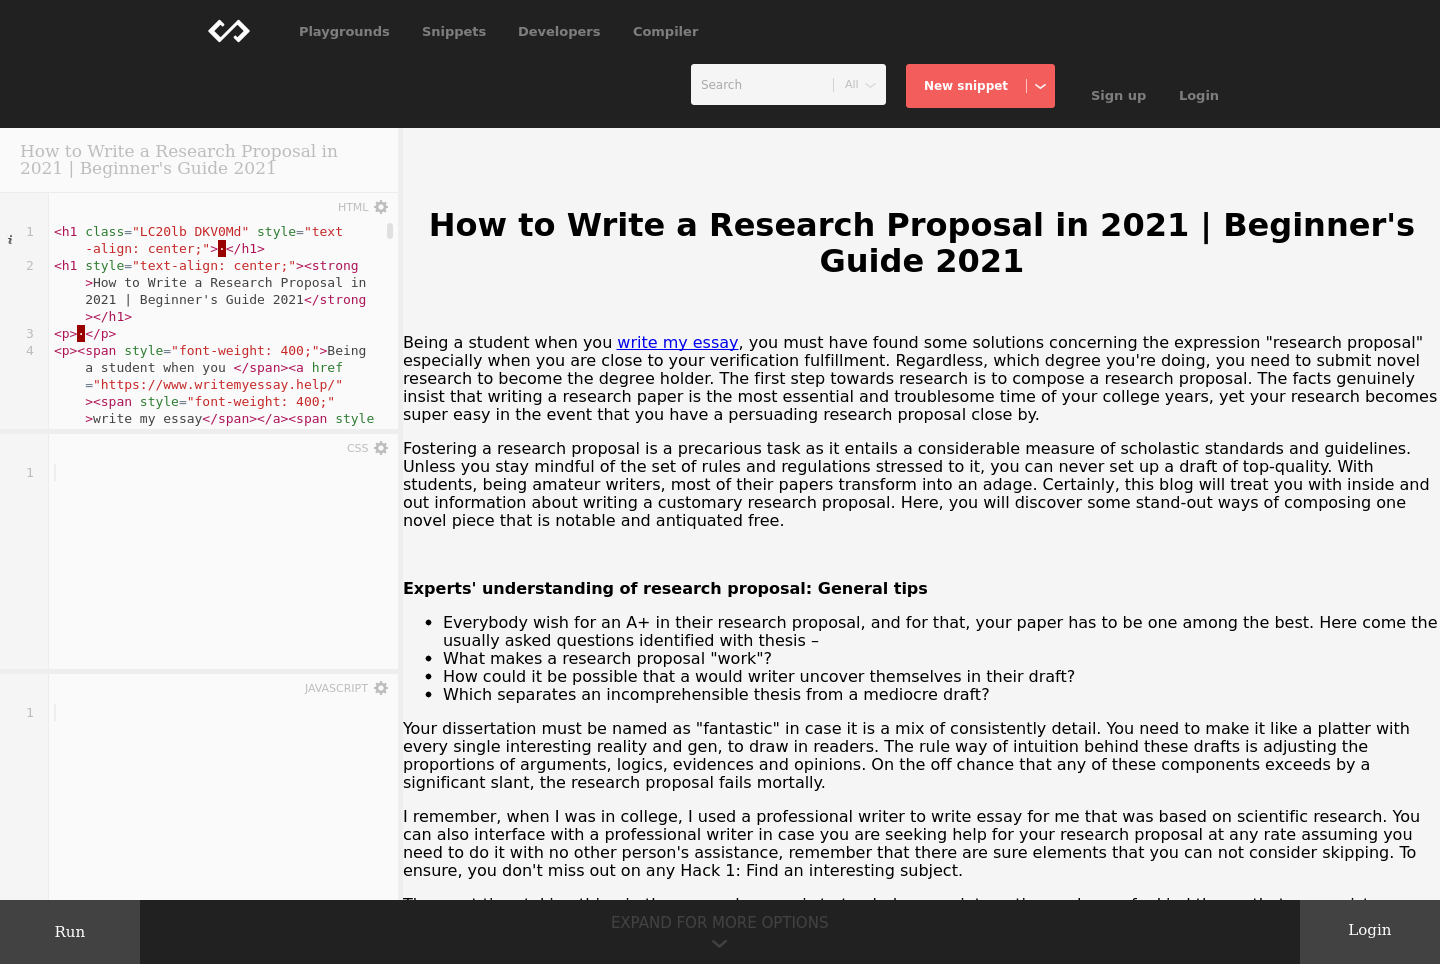 research project proposal 2021